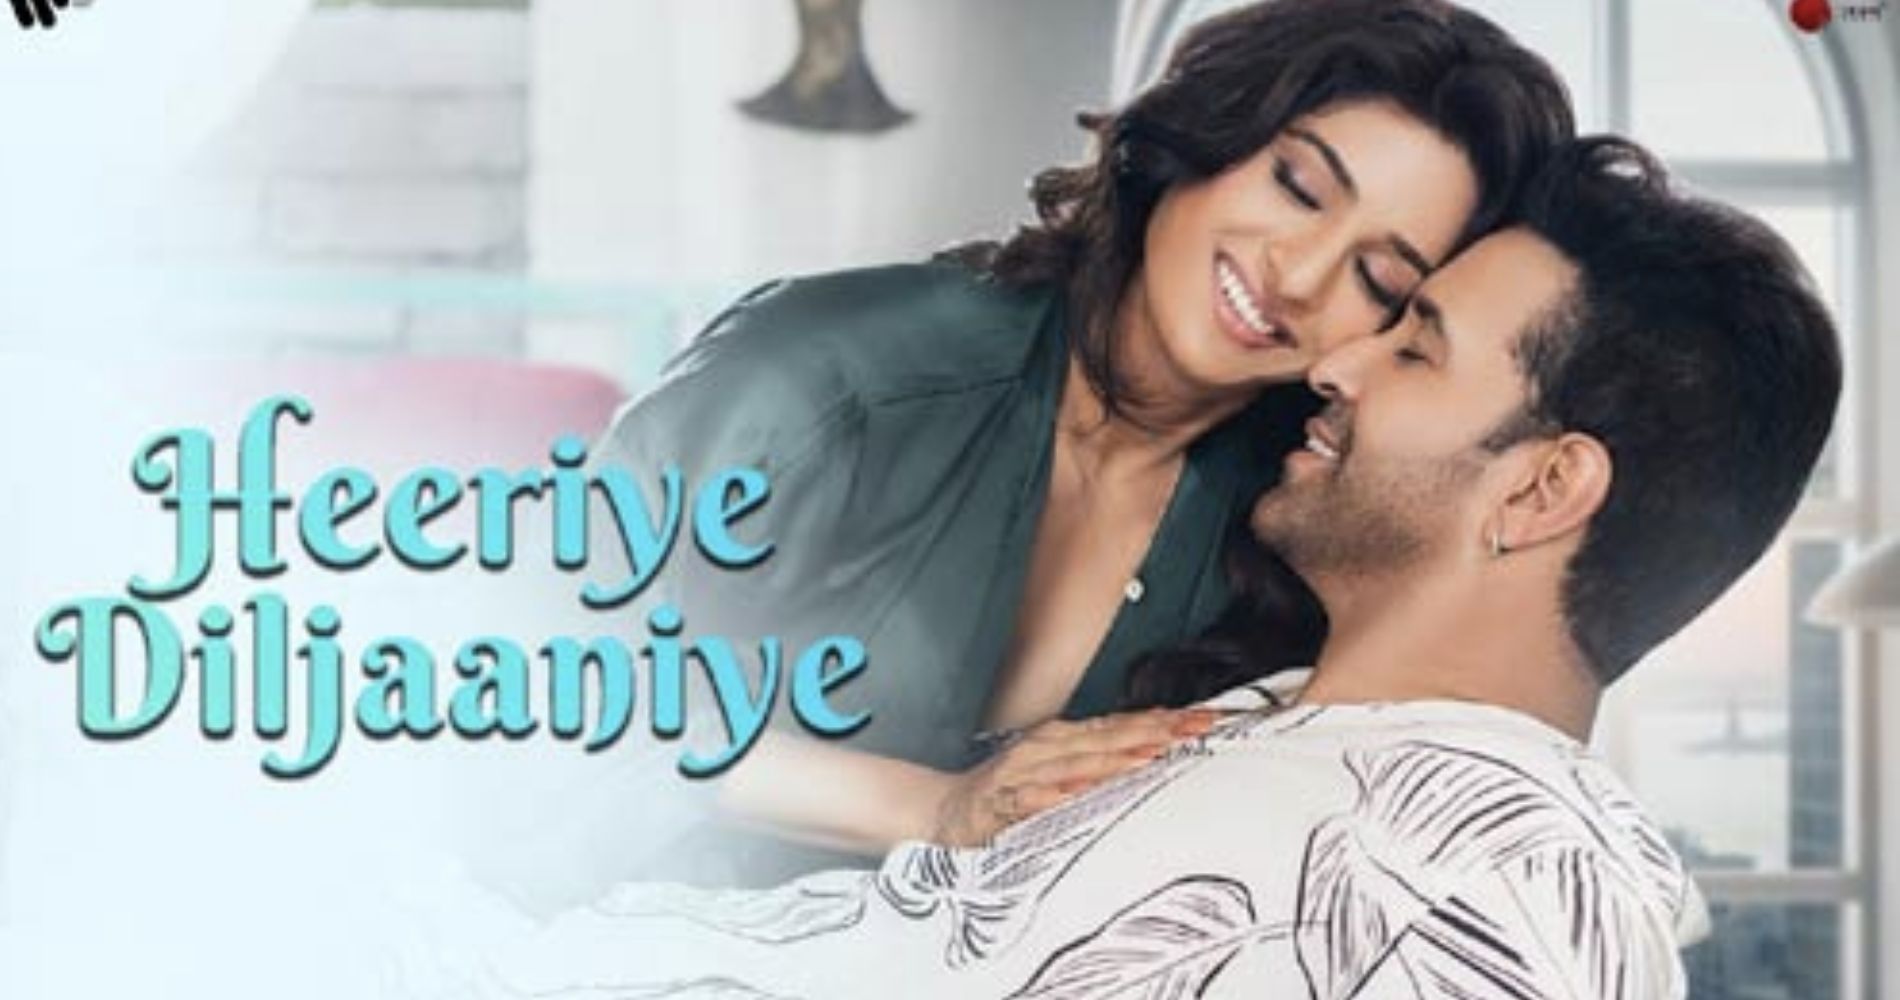 EXCLUSIVE: In conversation with Aamir Ali on his latest music video “Heeriye Diljaaniye” with the soulful voice of Javed Ali